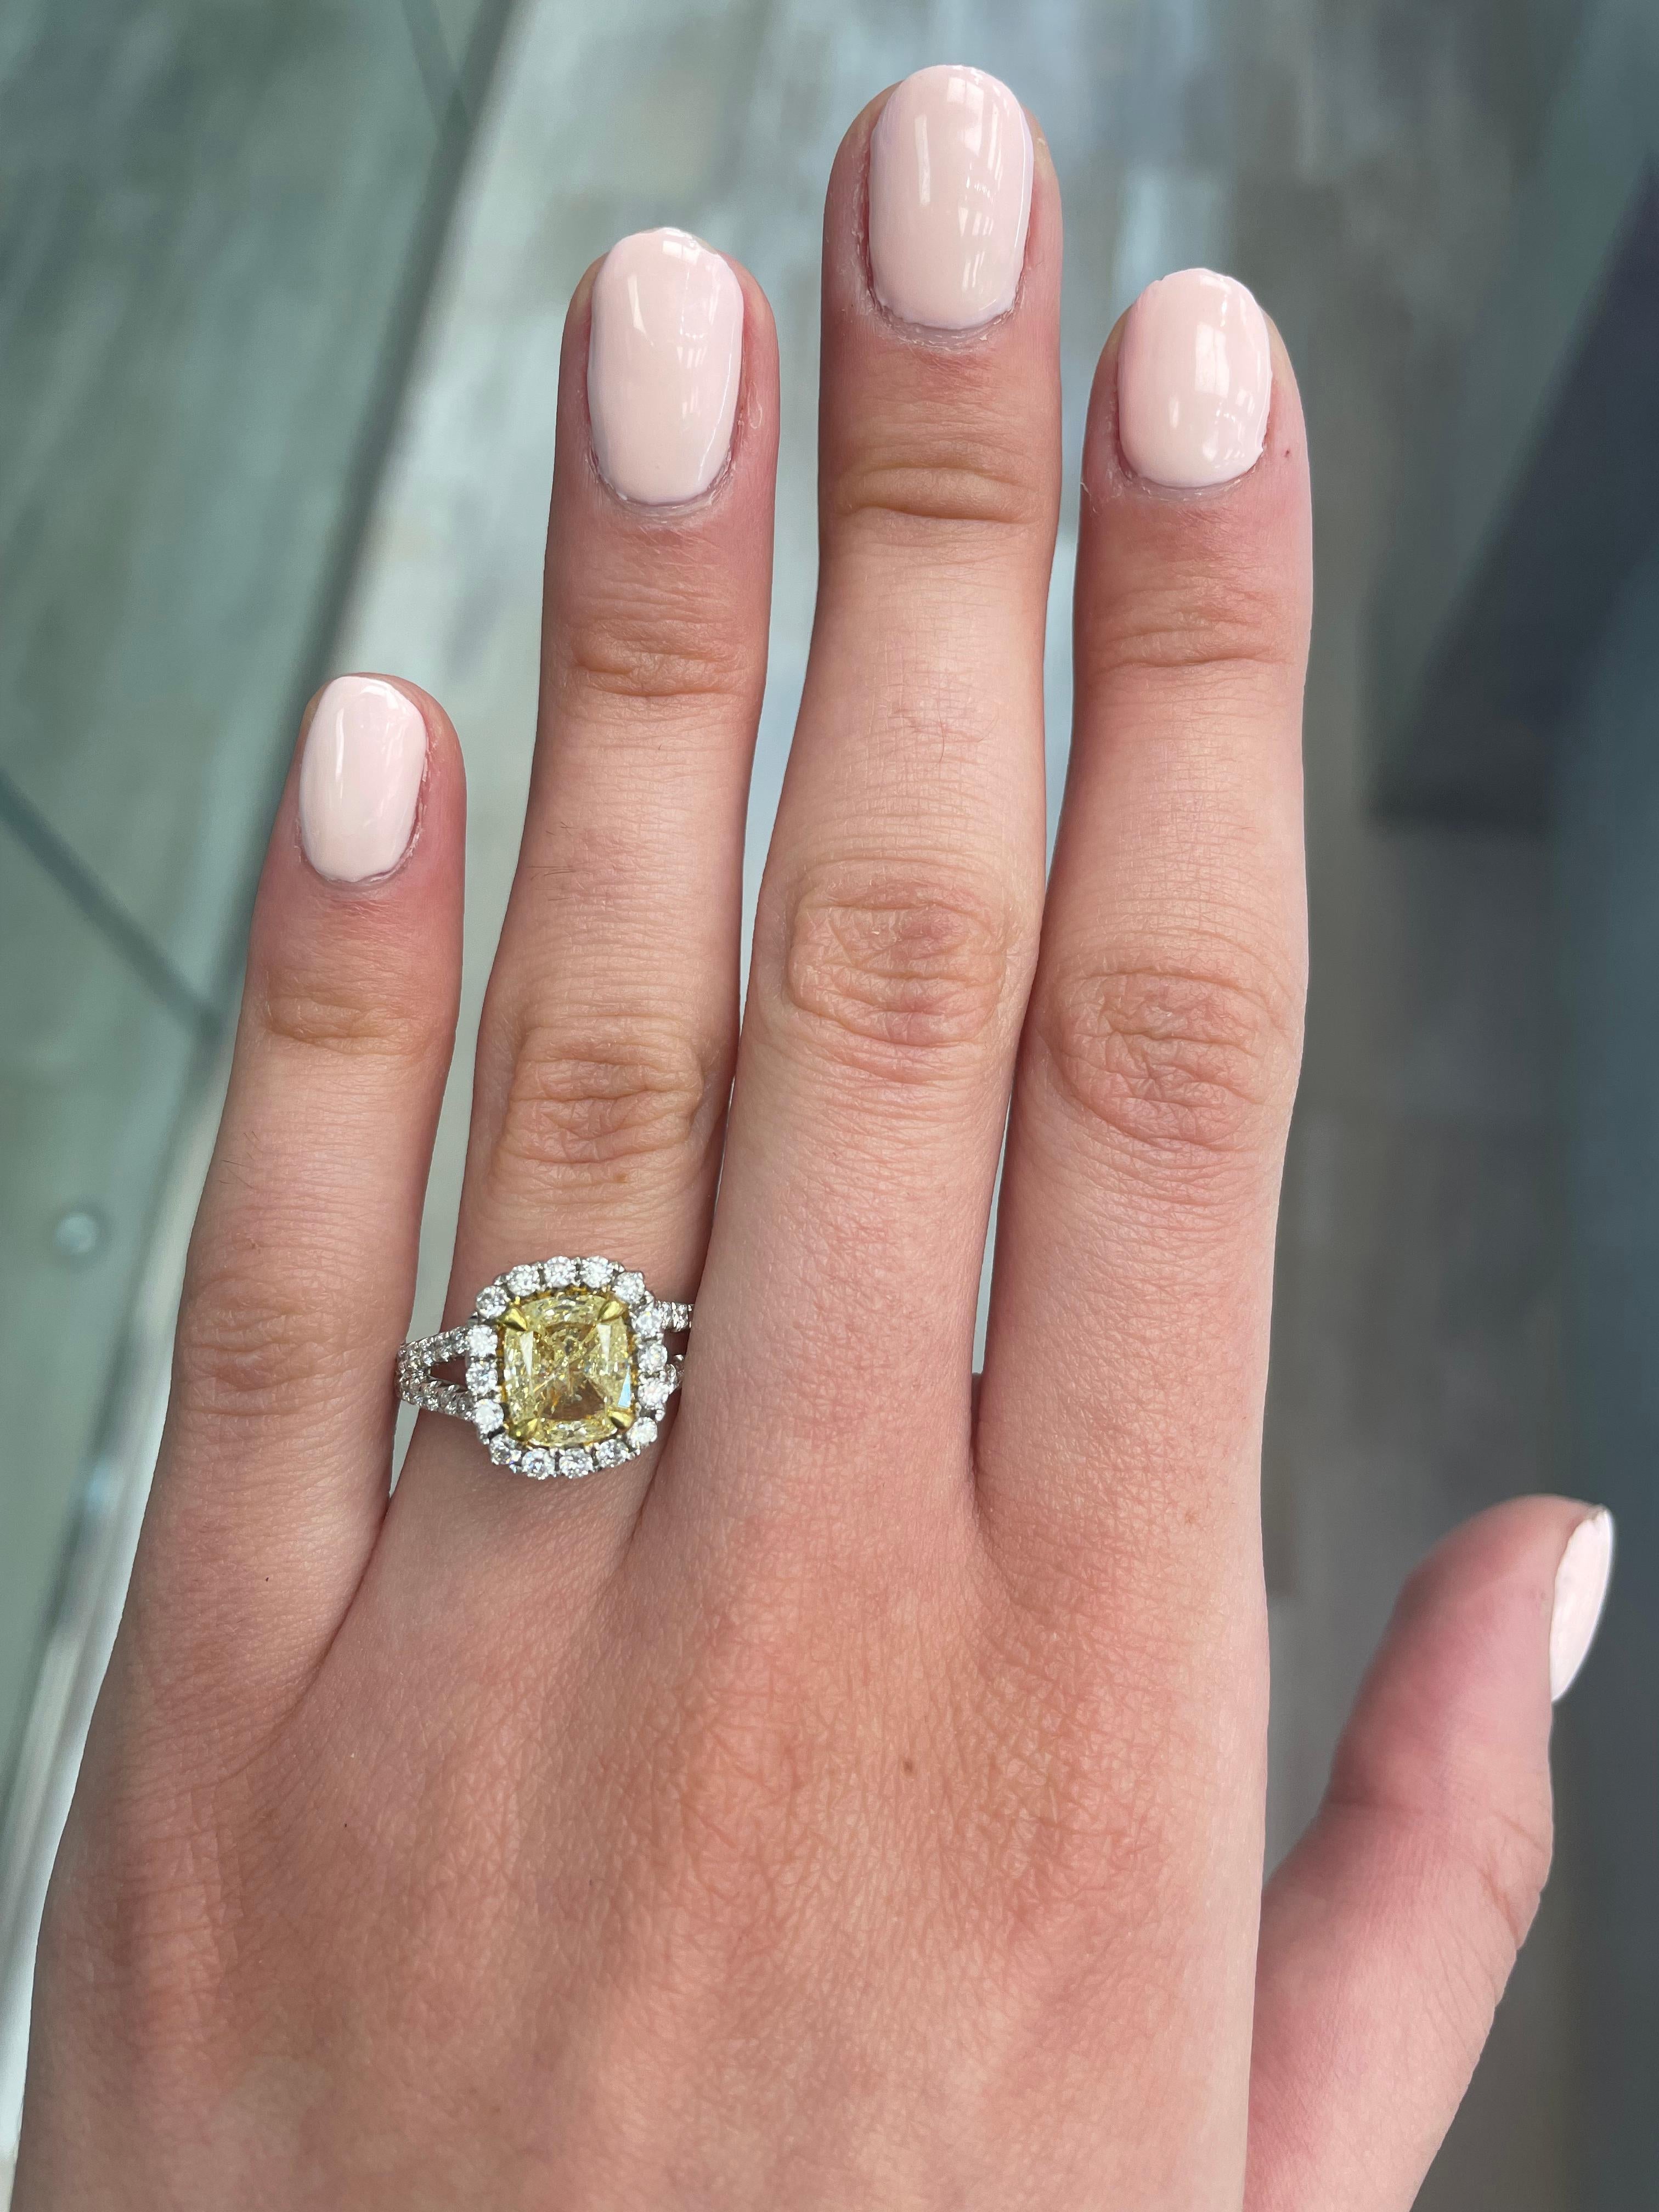 Stunning modern EGL certified yellow diamond with halo ring, two-tone 18k yellow and white gold, split shank. By Alexander Beverly Hills
2.75 carats total diamond weight.
2.02 carat cushion cut Fancy Yellow color and SI3 clarity diamond, EGL graded.